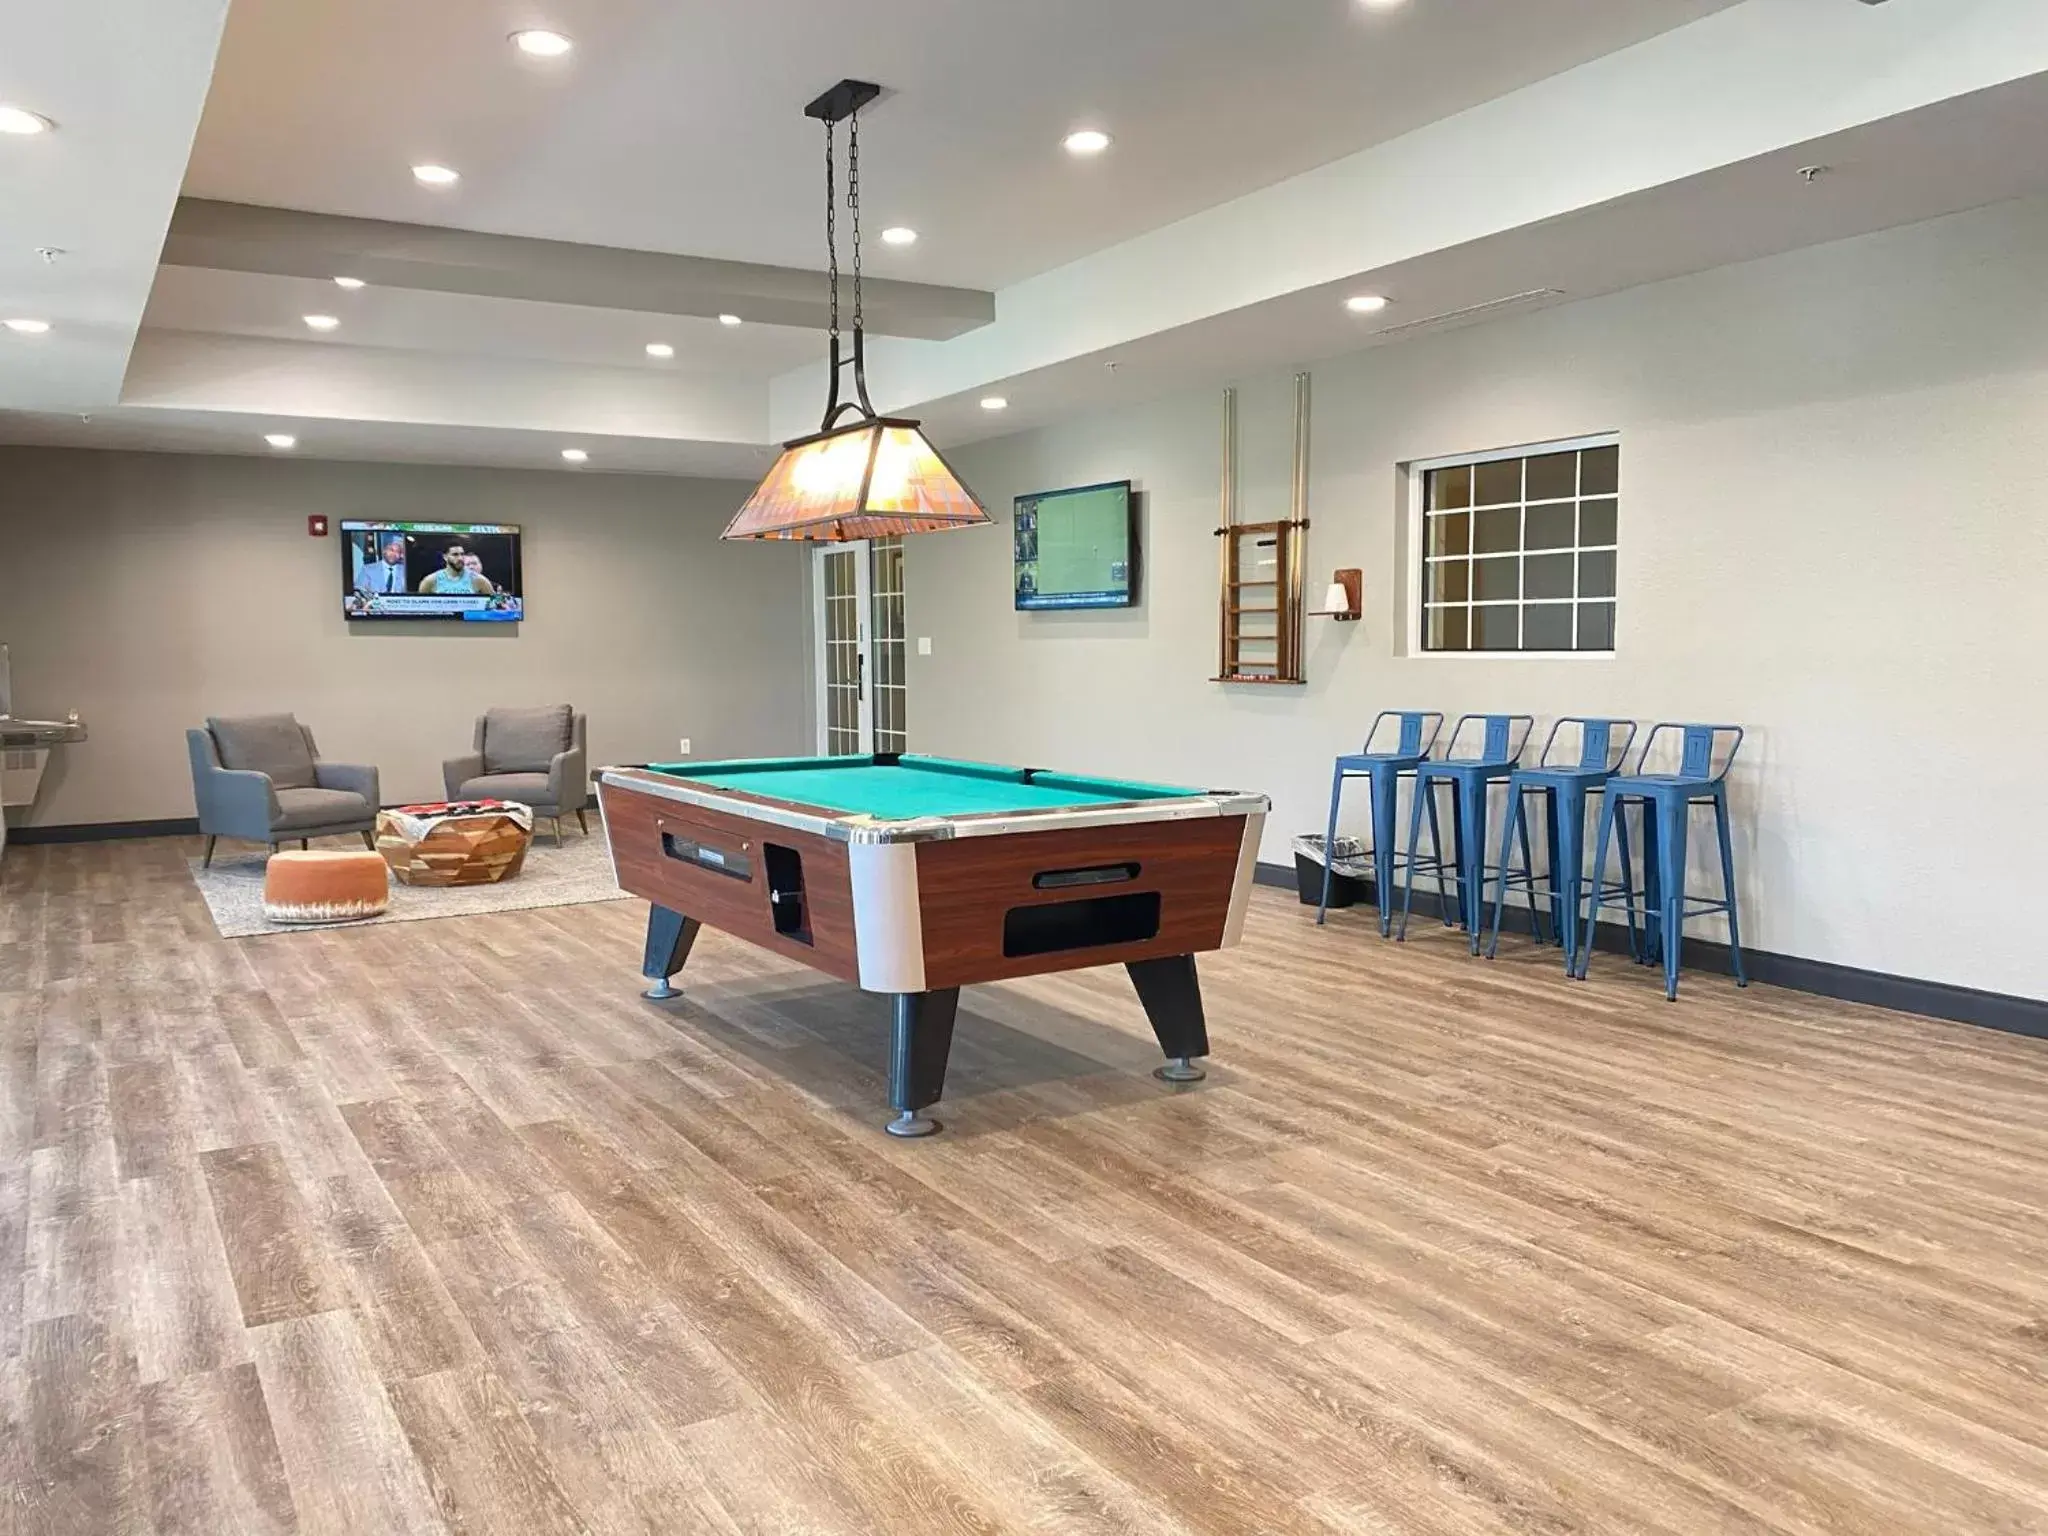 Game Room, Billiards in Candlewood Suites Bowling Green, an IHG Hotel